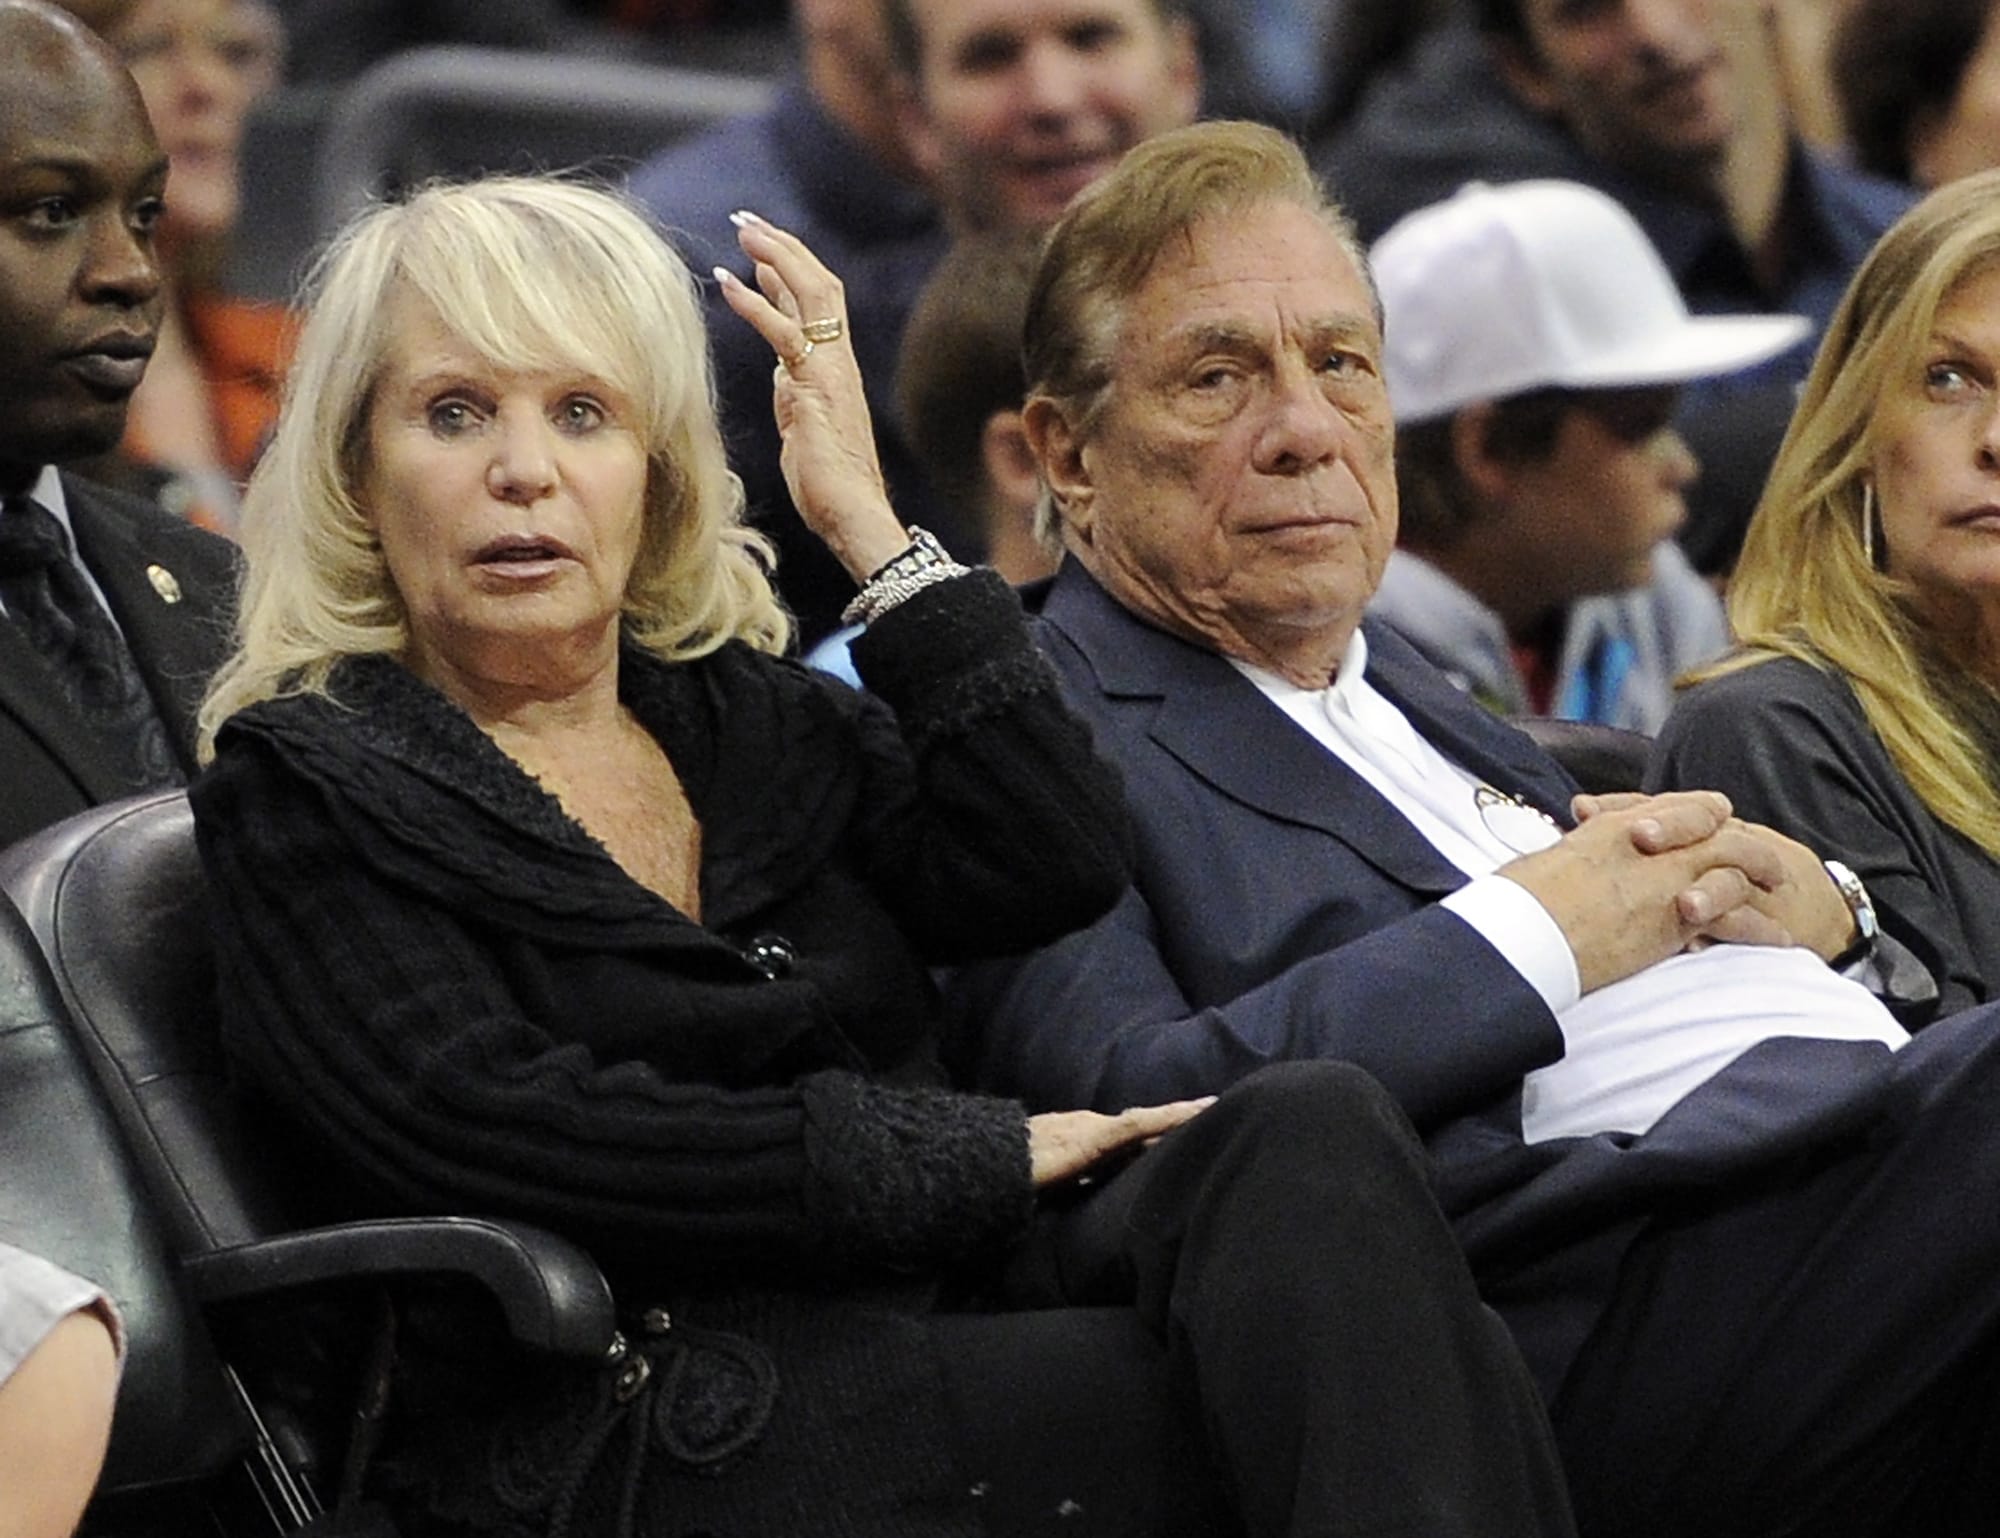 Los Angeles Clippers owner Donald T. Sterling sits with his wife Shelly during the Clippers NBA basketball game against the Detroit Pistons on Nov. 12, 2010 in Los Angeles. Donald Sterling has agreed to surrender his stake of the Clippers to his wife, and she is moving forward with selling the team.